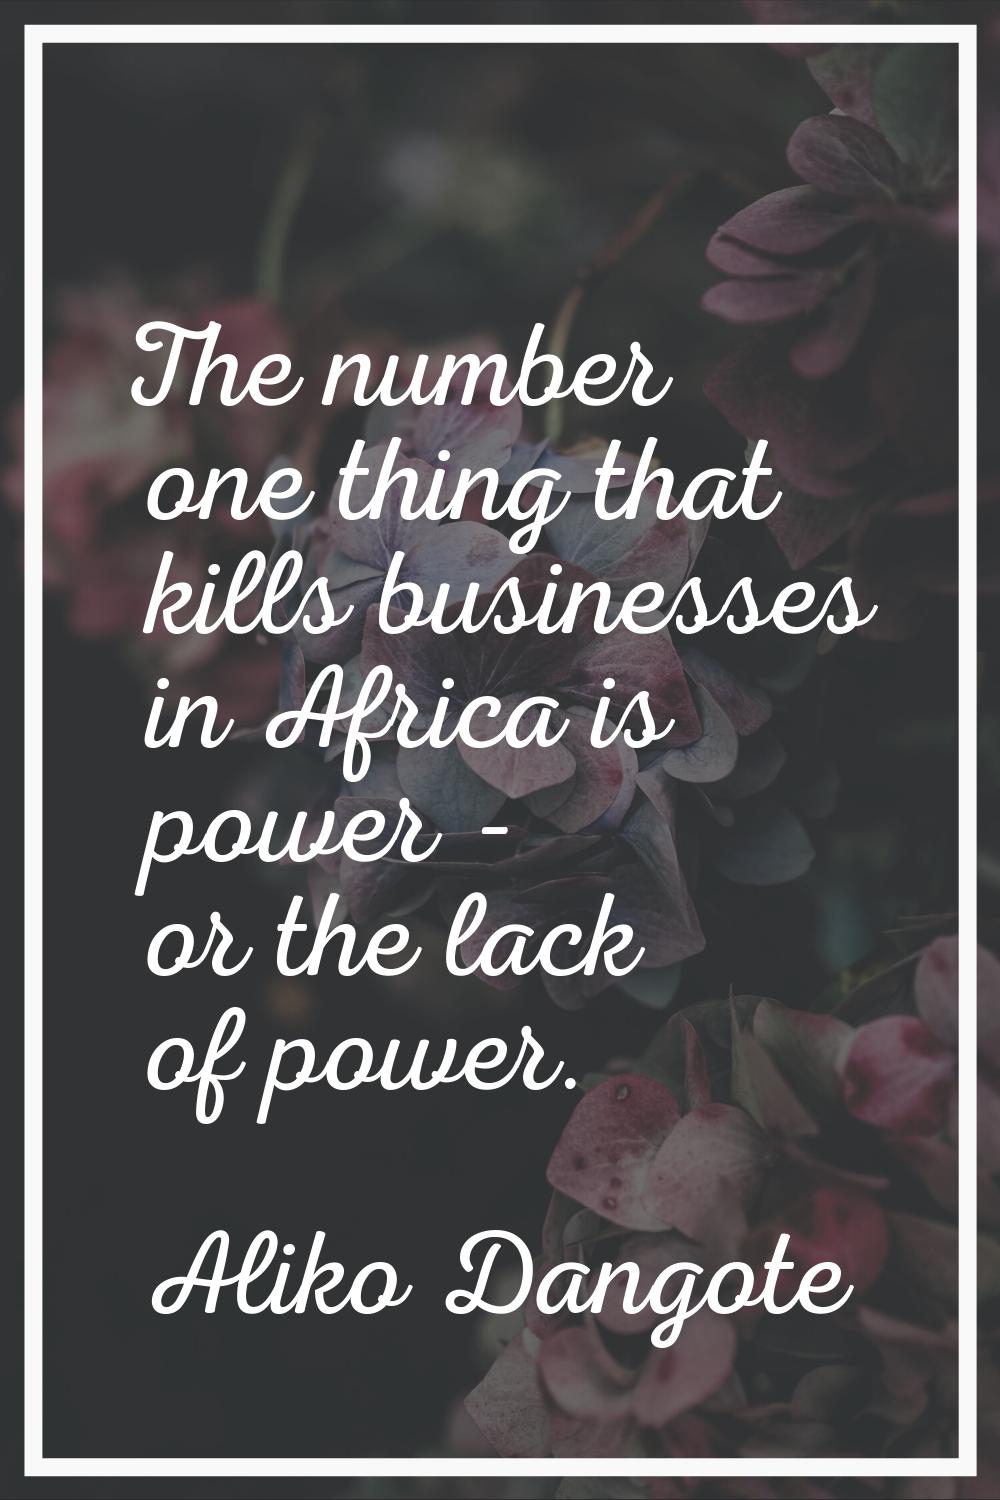 The number one thing that kills businesses in Africa is power - or the lack of power.